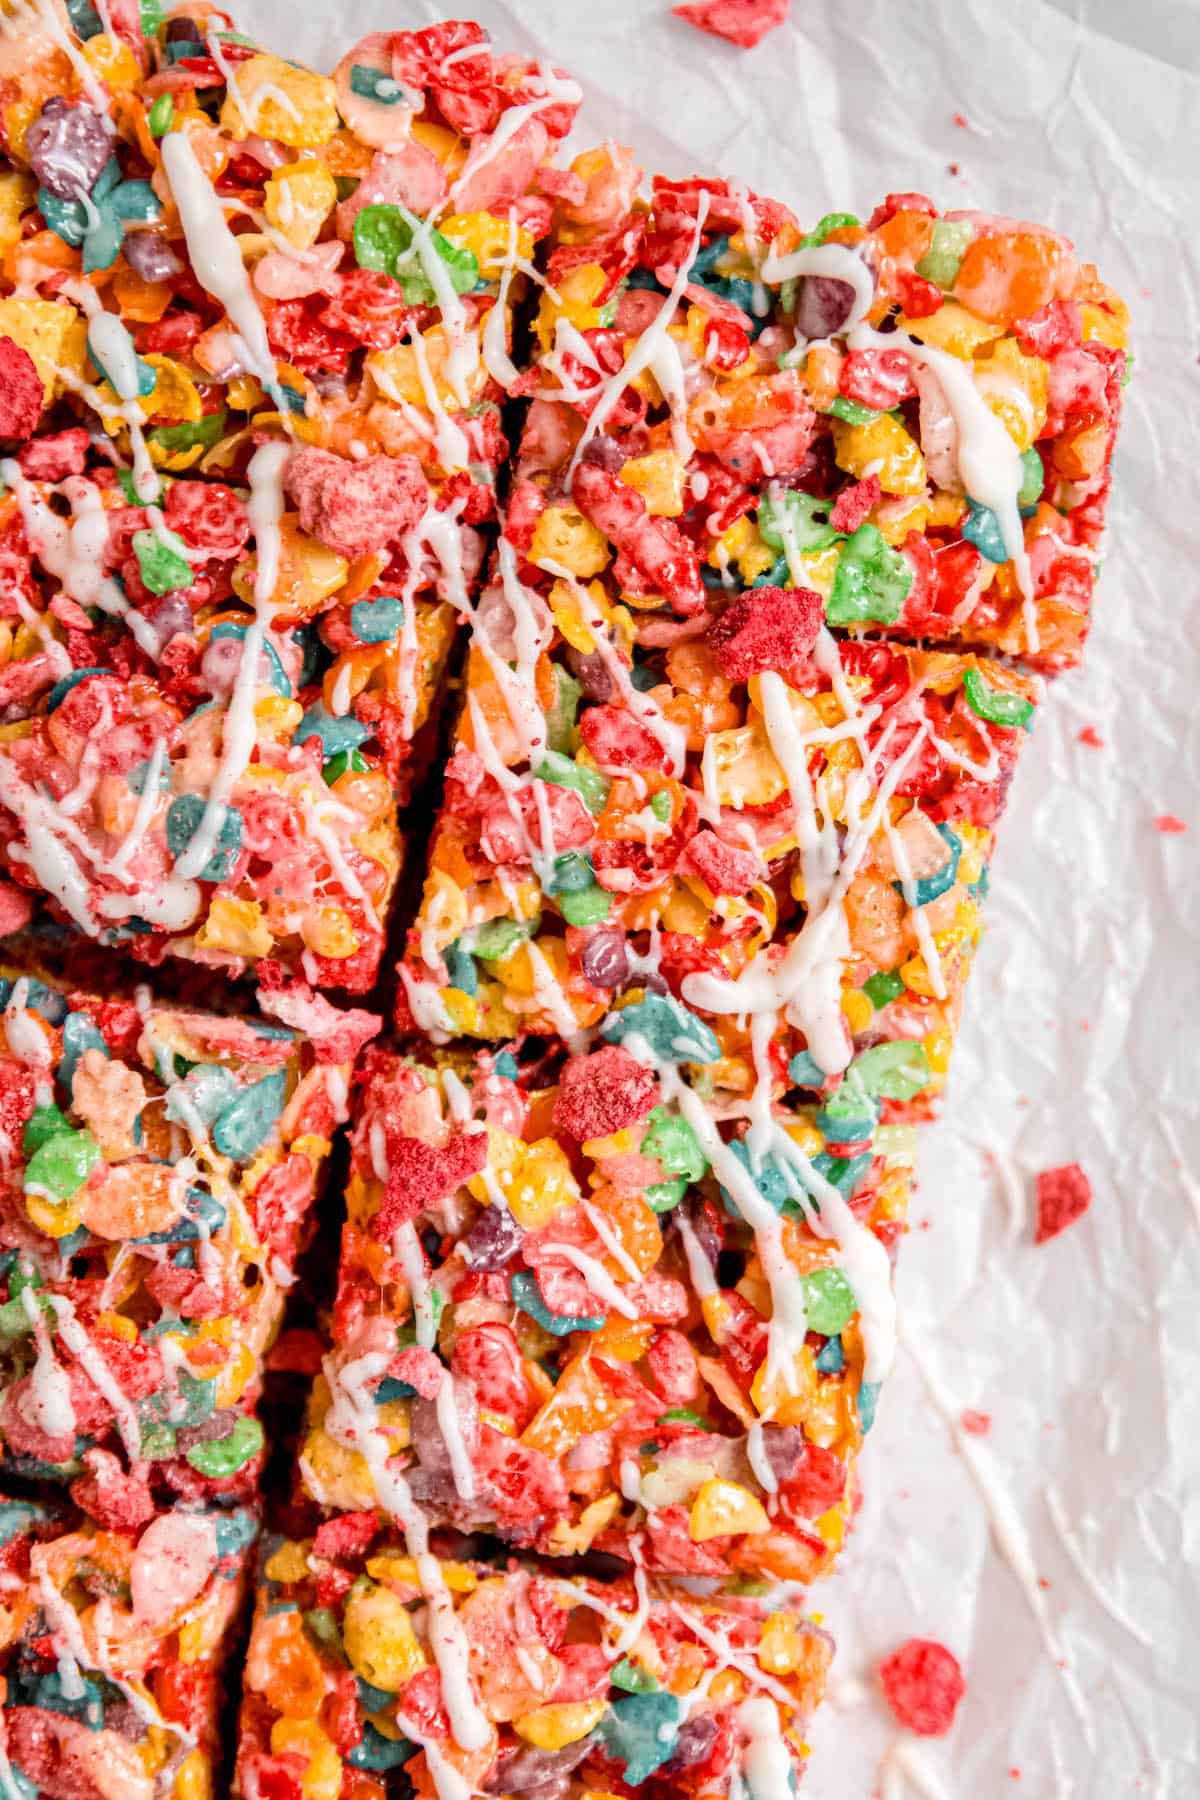 hero image of a batch of fruity pebbles cereal bars topped with strawberry white chocolate drizzle and freeze dried strawberry dust.